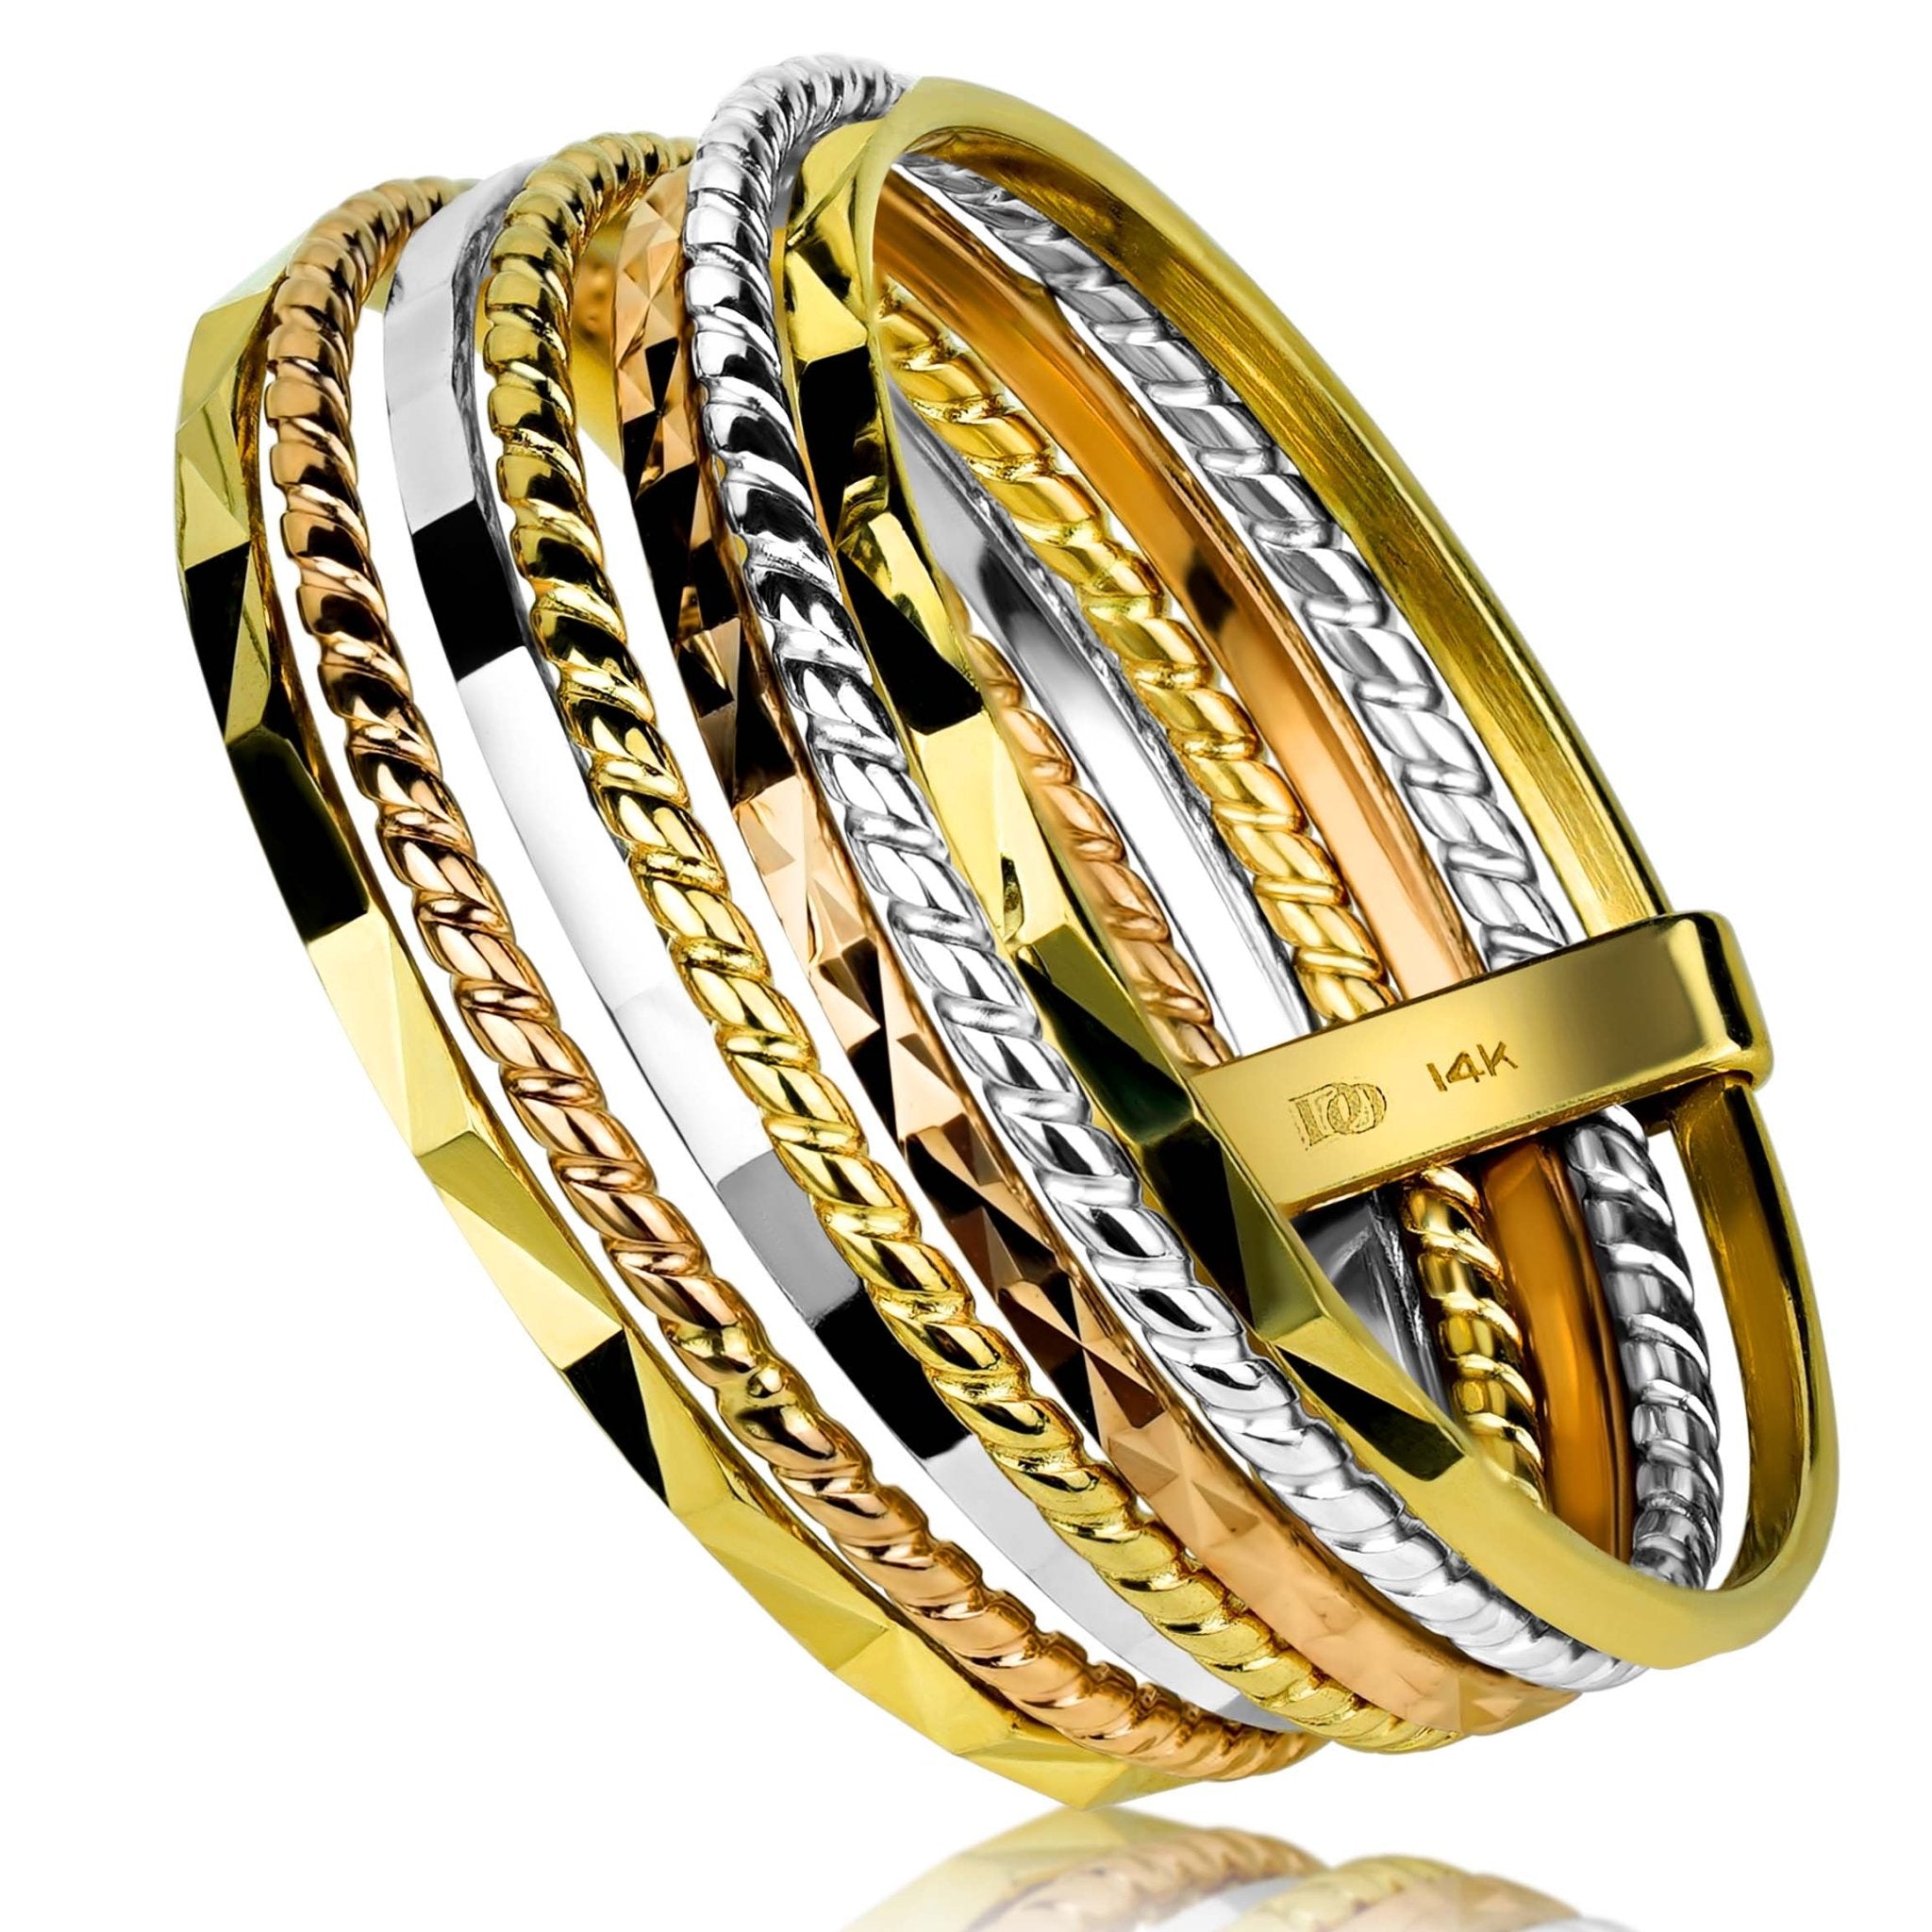 Catholic Tricolor 7 Day Jewelry Gold Filled Religious Gold Bangles Bracelet  with Charms Semanario Bracelets Mexican